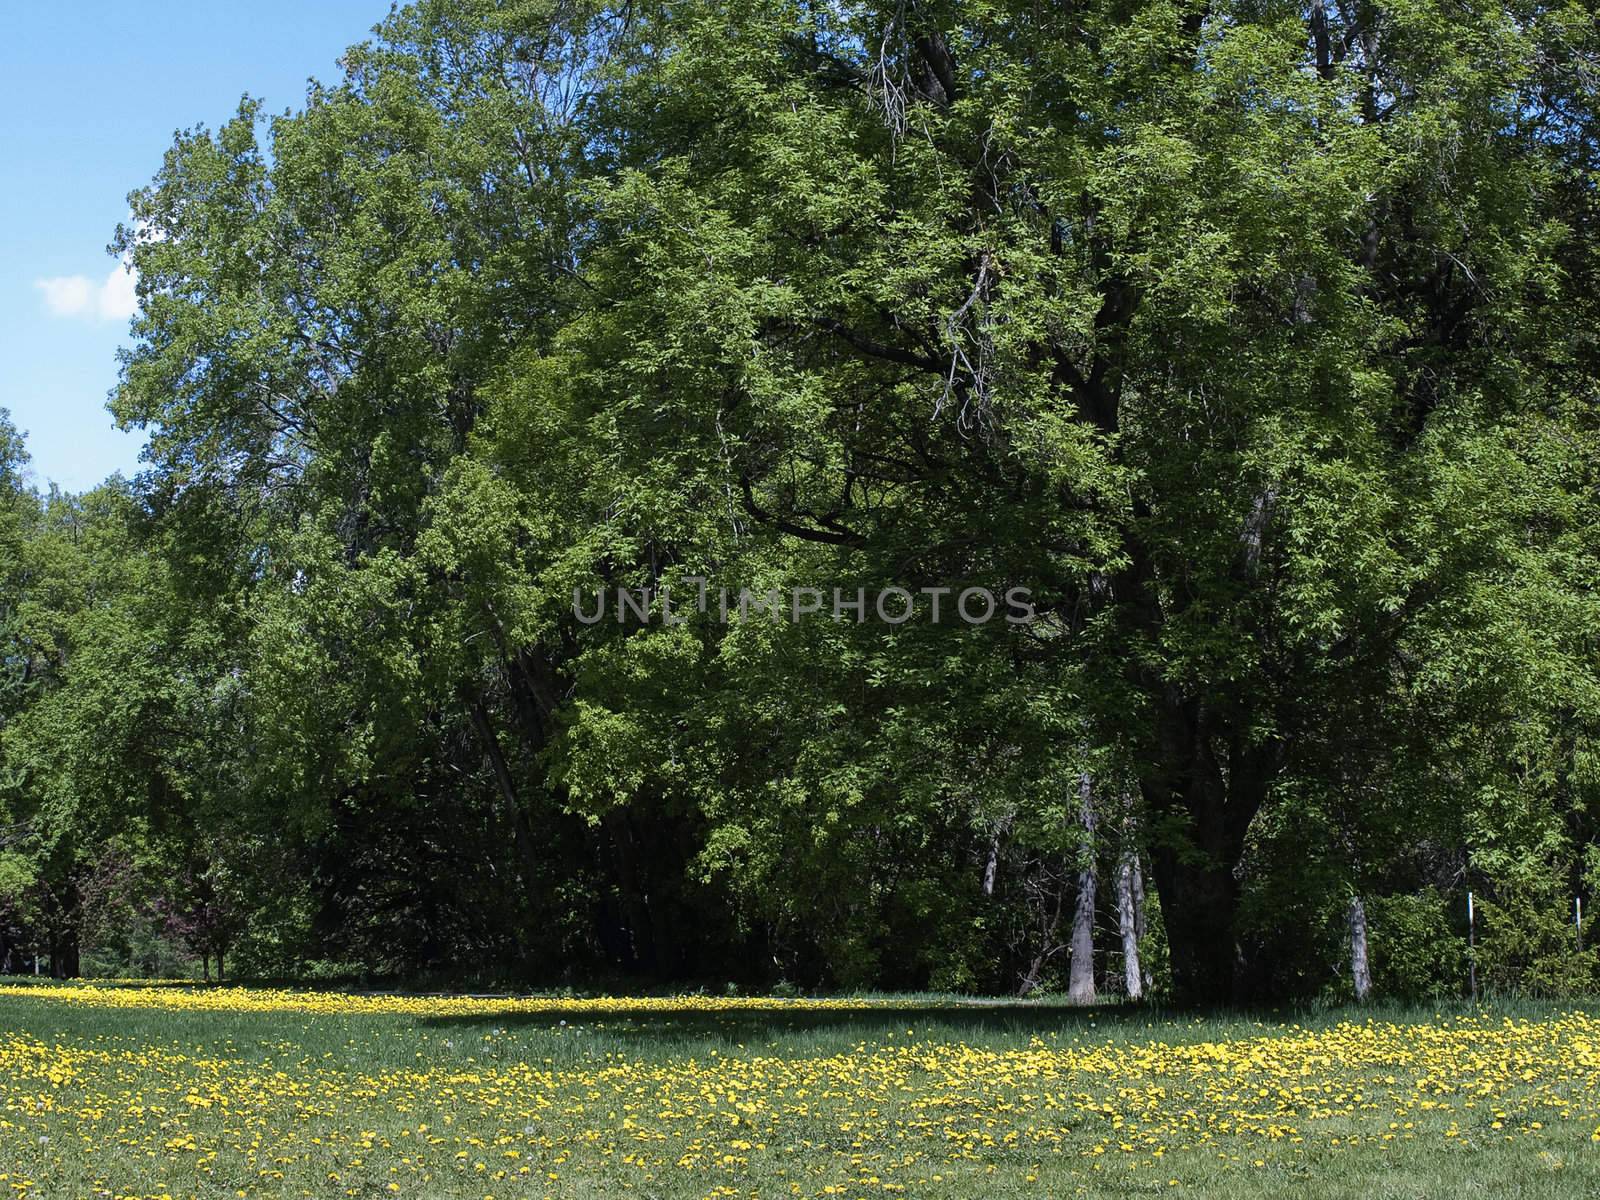 Trees and Dandelions by watamyr